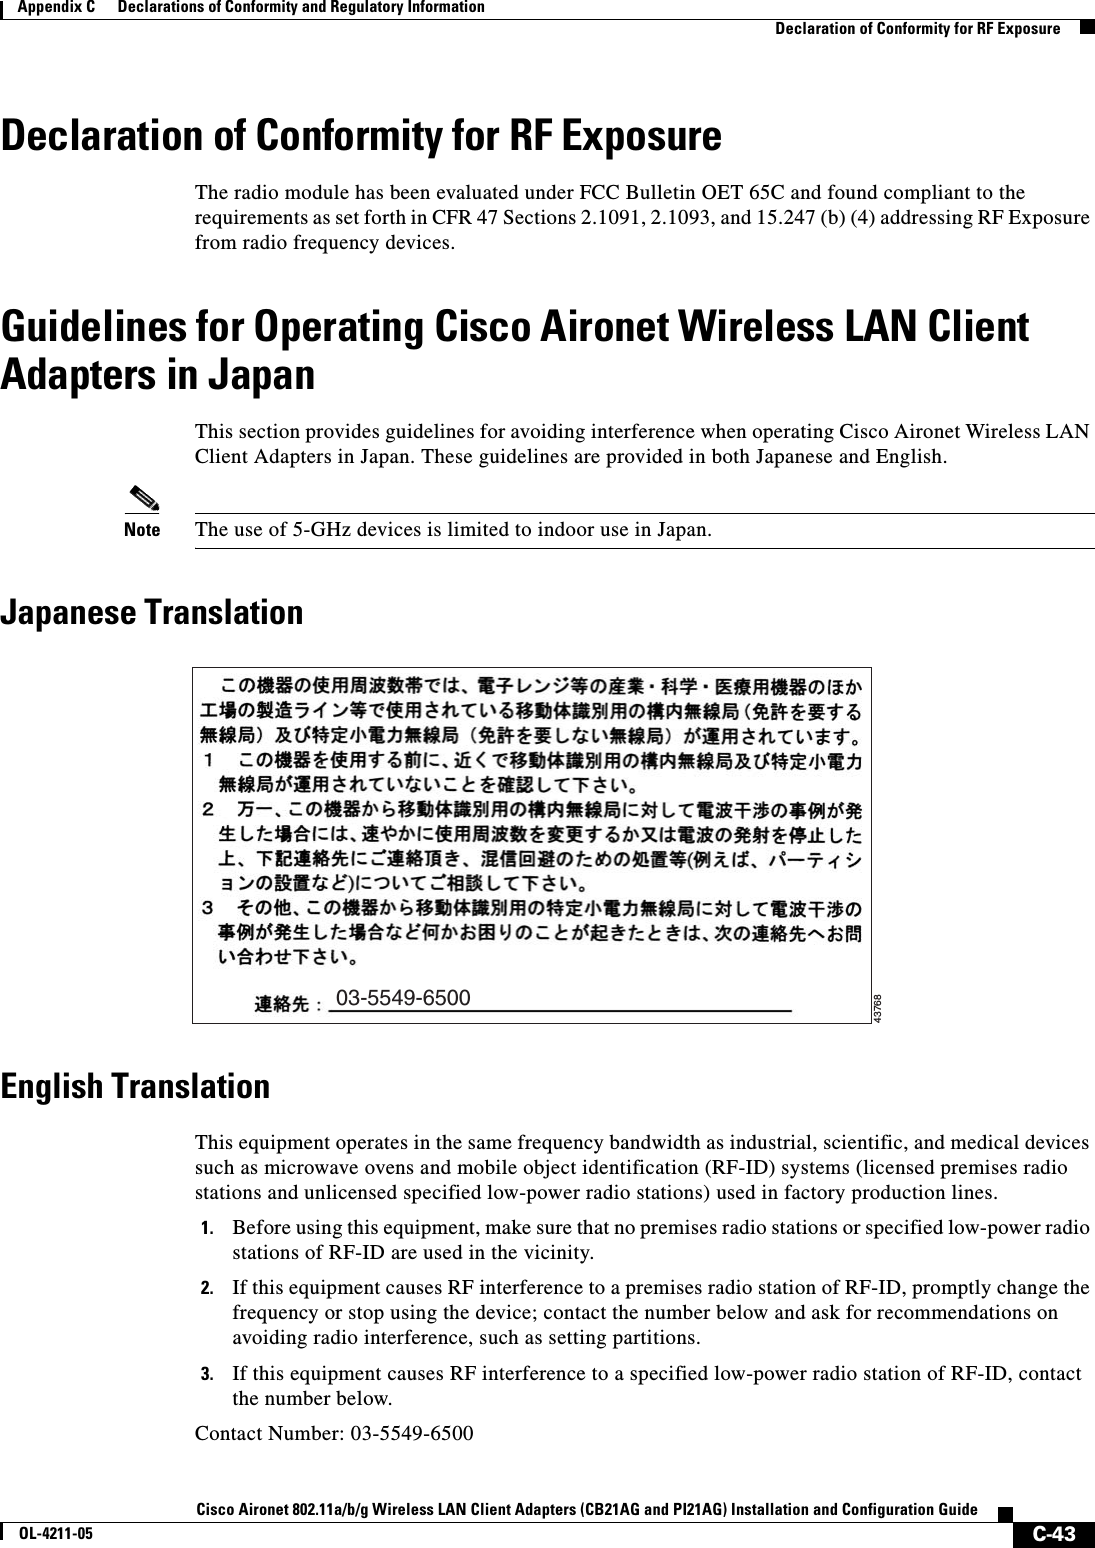 C-43Cisco Aironet 802.11a/b/g Wireless LAN Client Adapters (CB21AG and PI21AG) Installation and Configuration GuideOL-4211-05Appendix C      Declarations of Conformity and Regulatory InformationDeclaration of Conformity for RF ExposureDeclaration of Conformity for RF ExposureThe radio module has been evaluated under FCC Bulletin OET 65C and found compliant to the requirements as set forth in CFR 47 Sections 2.1091, 2.1093, and 15.247 (b) (4) addressing RF Exposure from radio frequency devices.Guidelines for Operating Cisco Aironet Wireless LAN Client Adapters in JapanThis section provides guidelines for avoiding interference when operating Cisco Aironet Wireless LAN Client Adapters in Japan. These guidelines are provided in both Japanese and English.Note The use of 5-GHz devices is limited to indoor use in Japan.Japanese TranslationEnglish TranslationThis equipment operates in the same frequency bandwidth as industrial, scientific, and medical devices such as microwave ovens and mobile object identification (RF-ID) systems (licensed premises radio stations and unlicensed specified low-power radio stations) used in factory production lines.1. Before using this equipment, make sure that no premises radio stations or specified low-power radio stations of RF-ID are used in the vicinity.2. If this equipment causes RF interference to a premises radio station of RF-ID, promptly change the frequency or stop using the device; contact the number below and ask for recommendations on avoiding radio interference, such as setting partitions.3. If this equipment causes RF interference to a specified low-power radio station of RF-ID, contact the number below.Contact Number: 03-5549-650003-5549-650043768